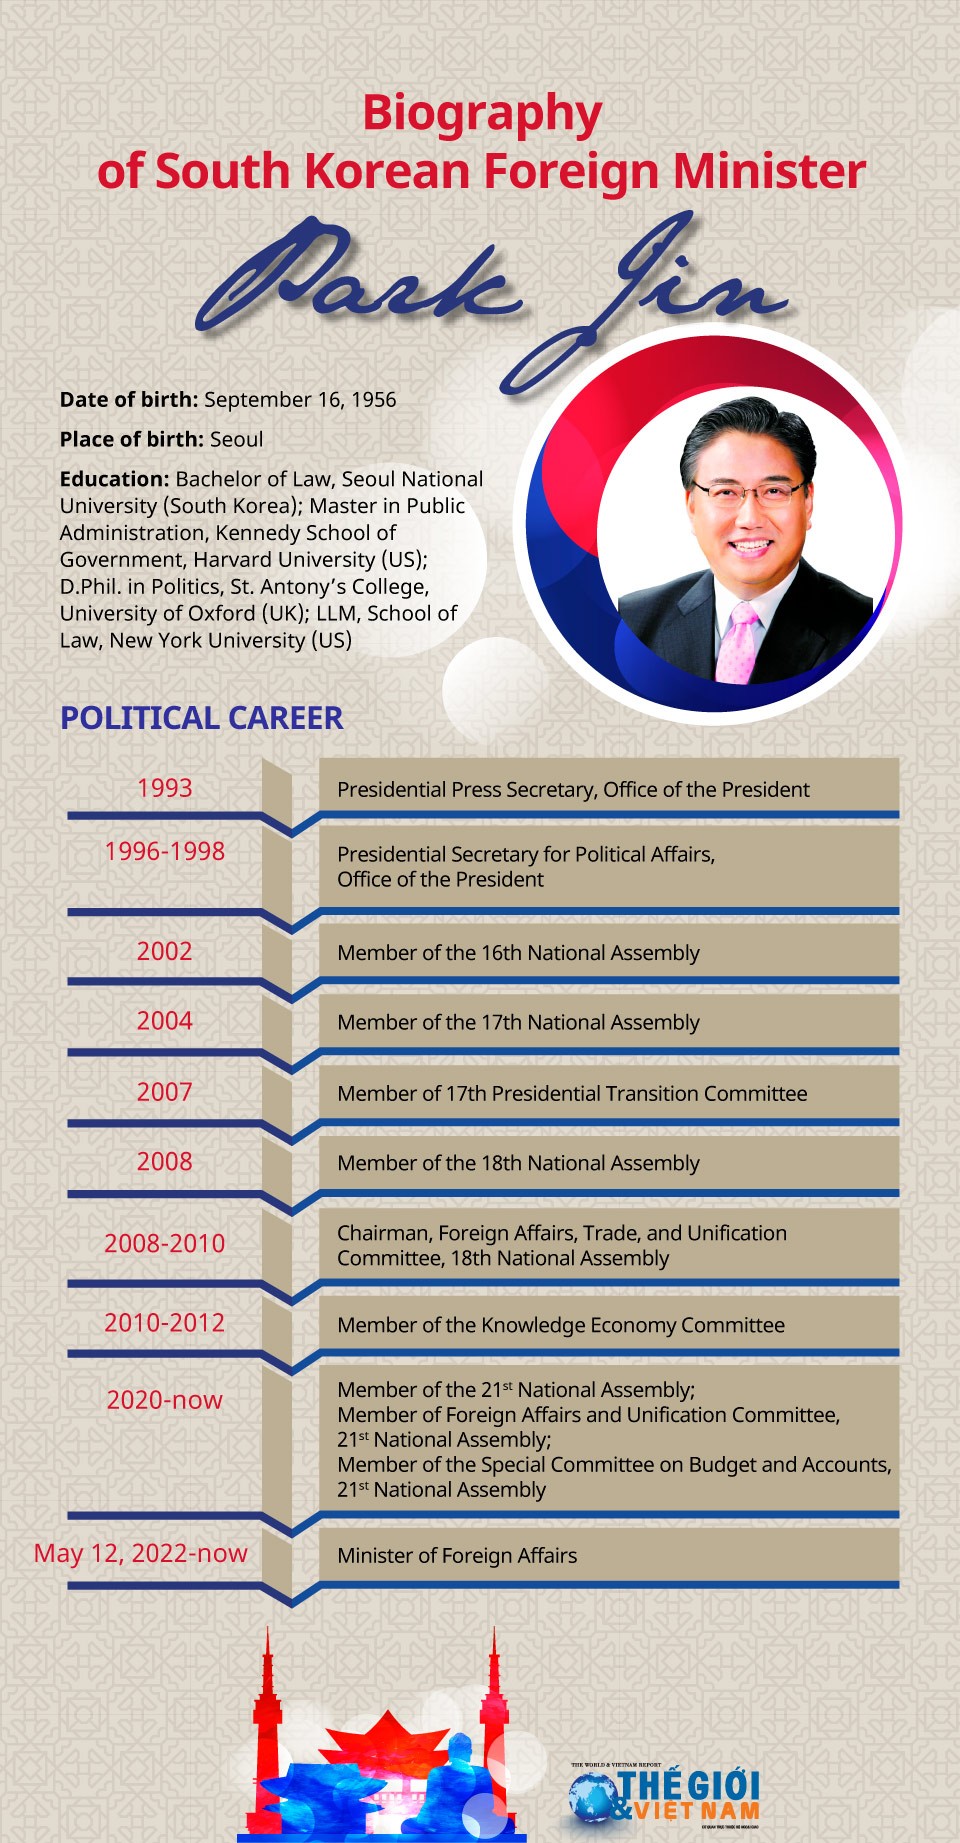 Biography of South Korean Foreign Minister Park Jin